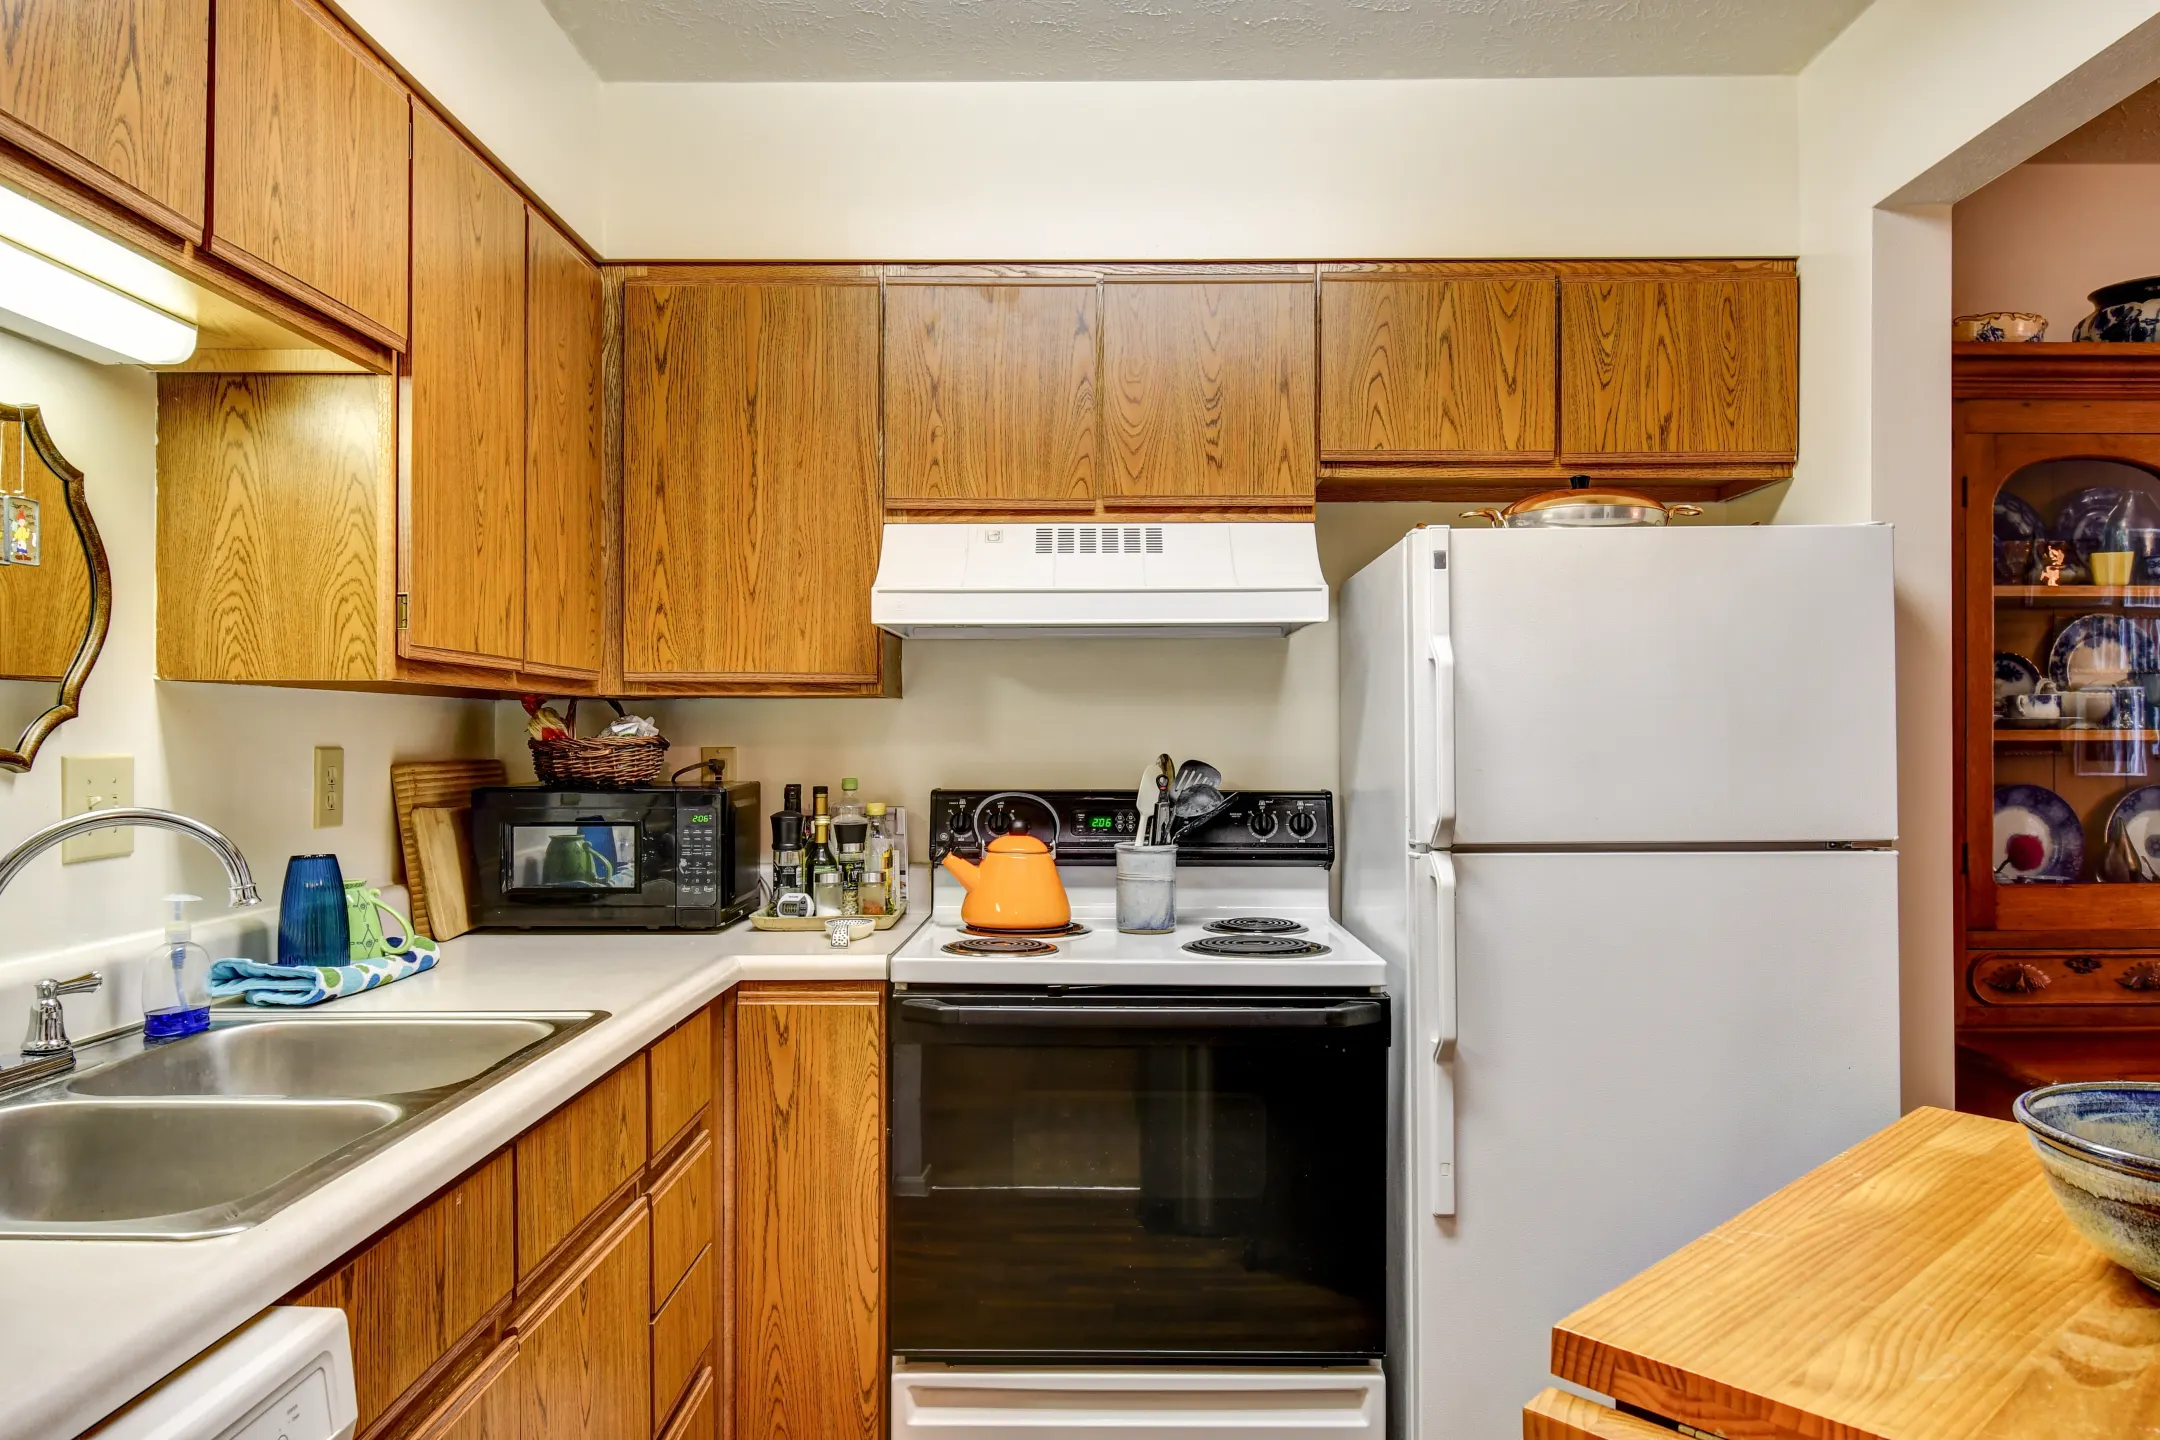 Kitchen - Hickory Knoll Apartments - Anderson, IN